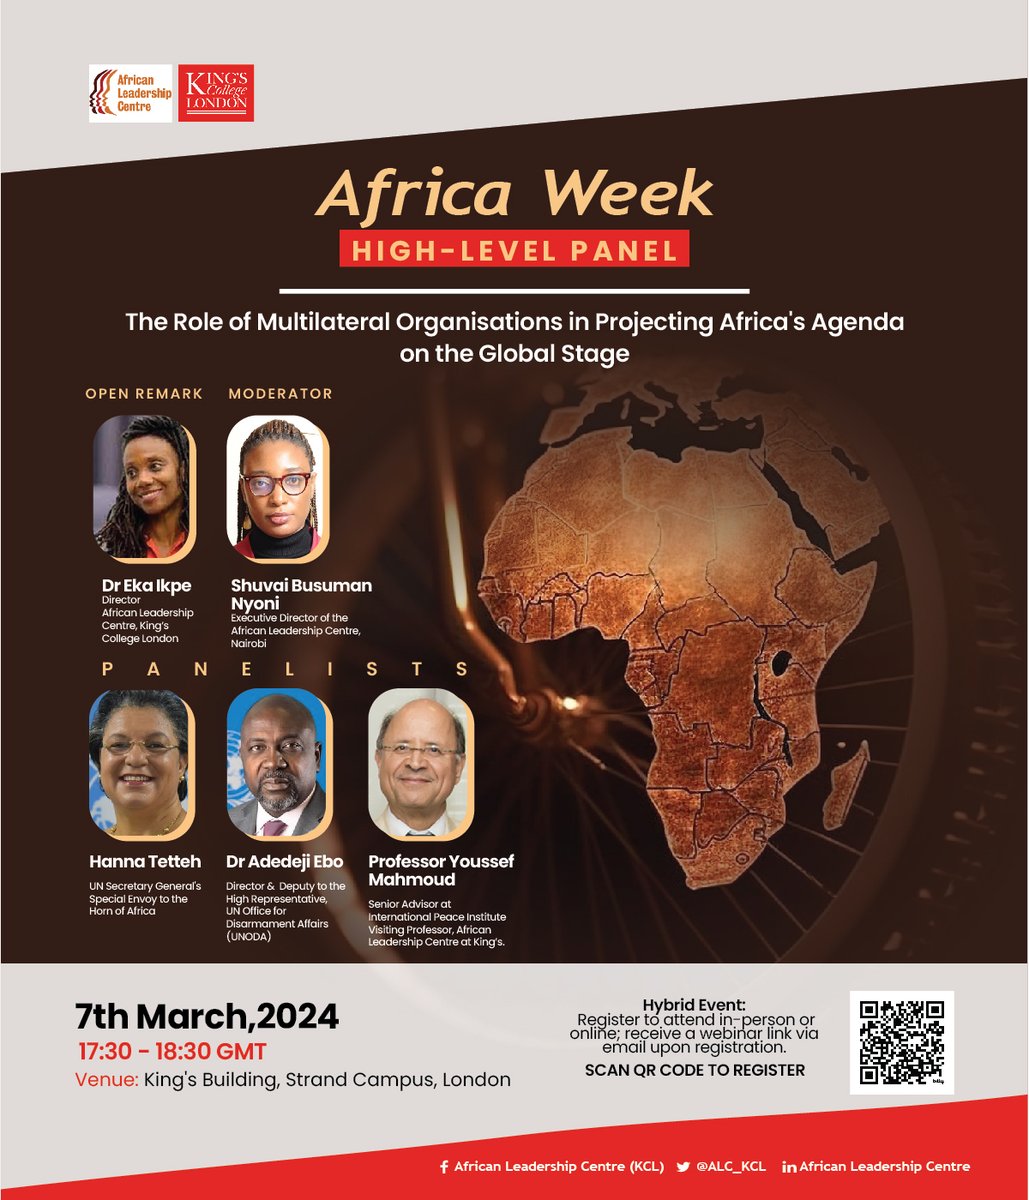 Africa Week 2024 High-Level Panel, organised by @ALC_KCL & @KingsCollegeLon, will be held in-person and online on March 7, titled “The Role of Multilateral Organisations in Projecting Africa’s Agenda on the Global Stage.” Register Here: bit.ly/3TfDk0r?r=qr #Africa2024